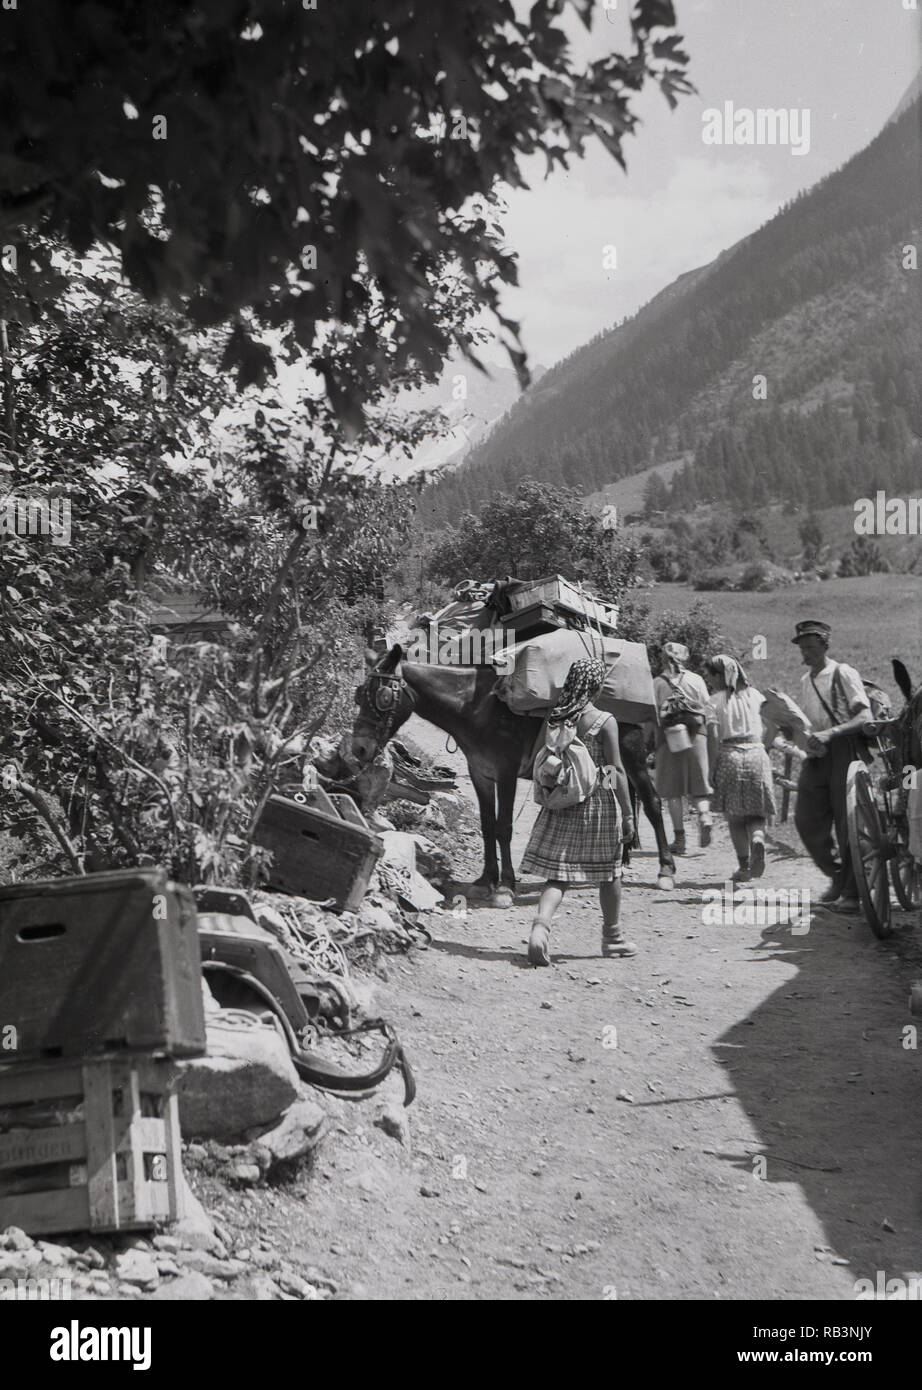 1950s, hikers walk pass a postman with a donkey who is delivering parcels on a dusty, rocky mountain track, Switzerland. Stock Photo